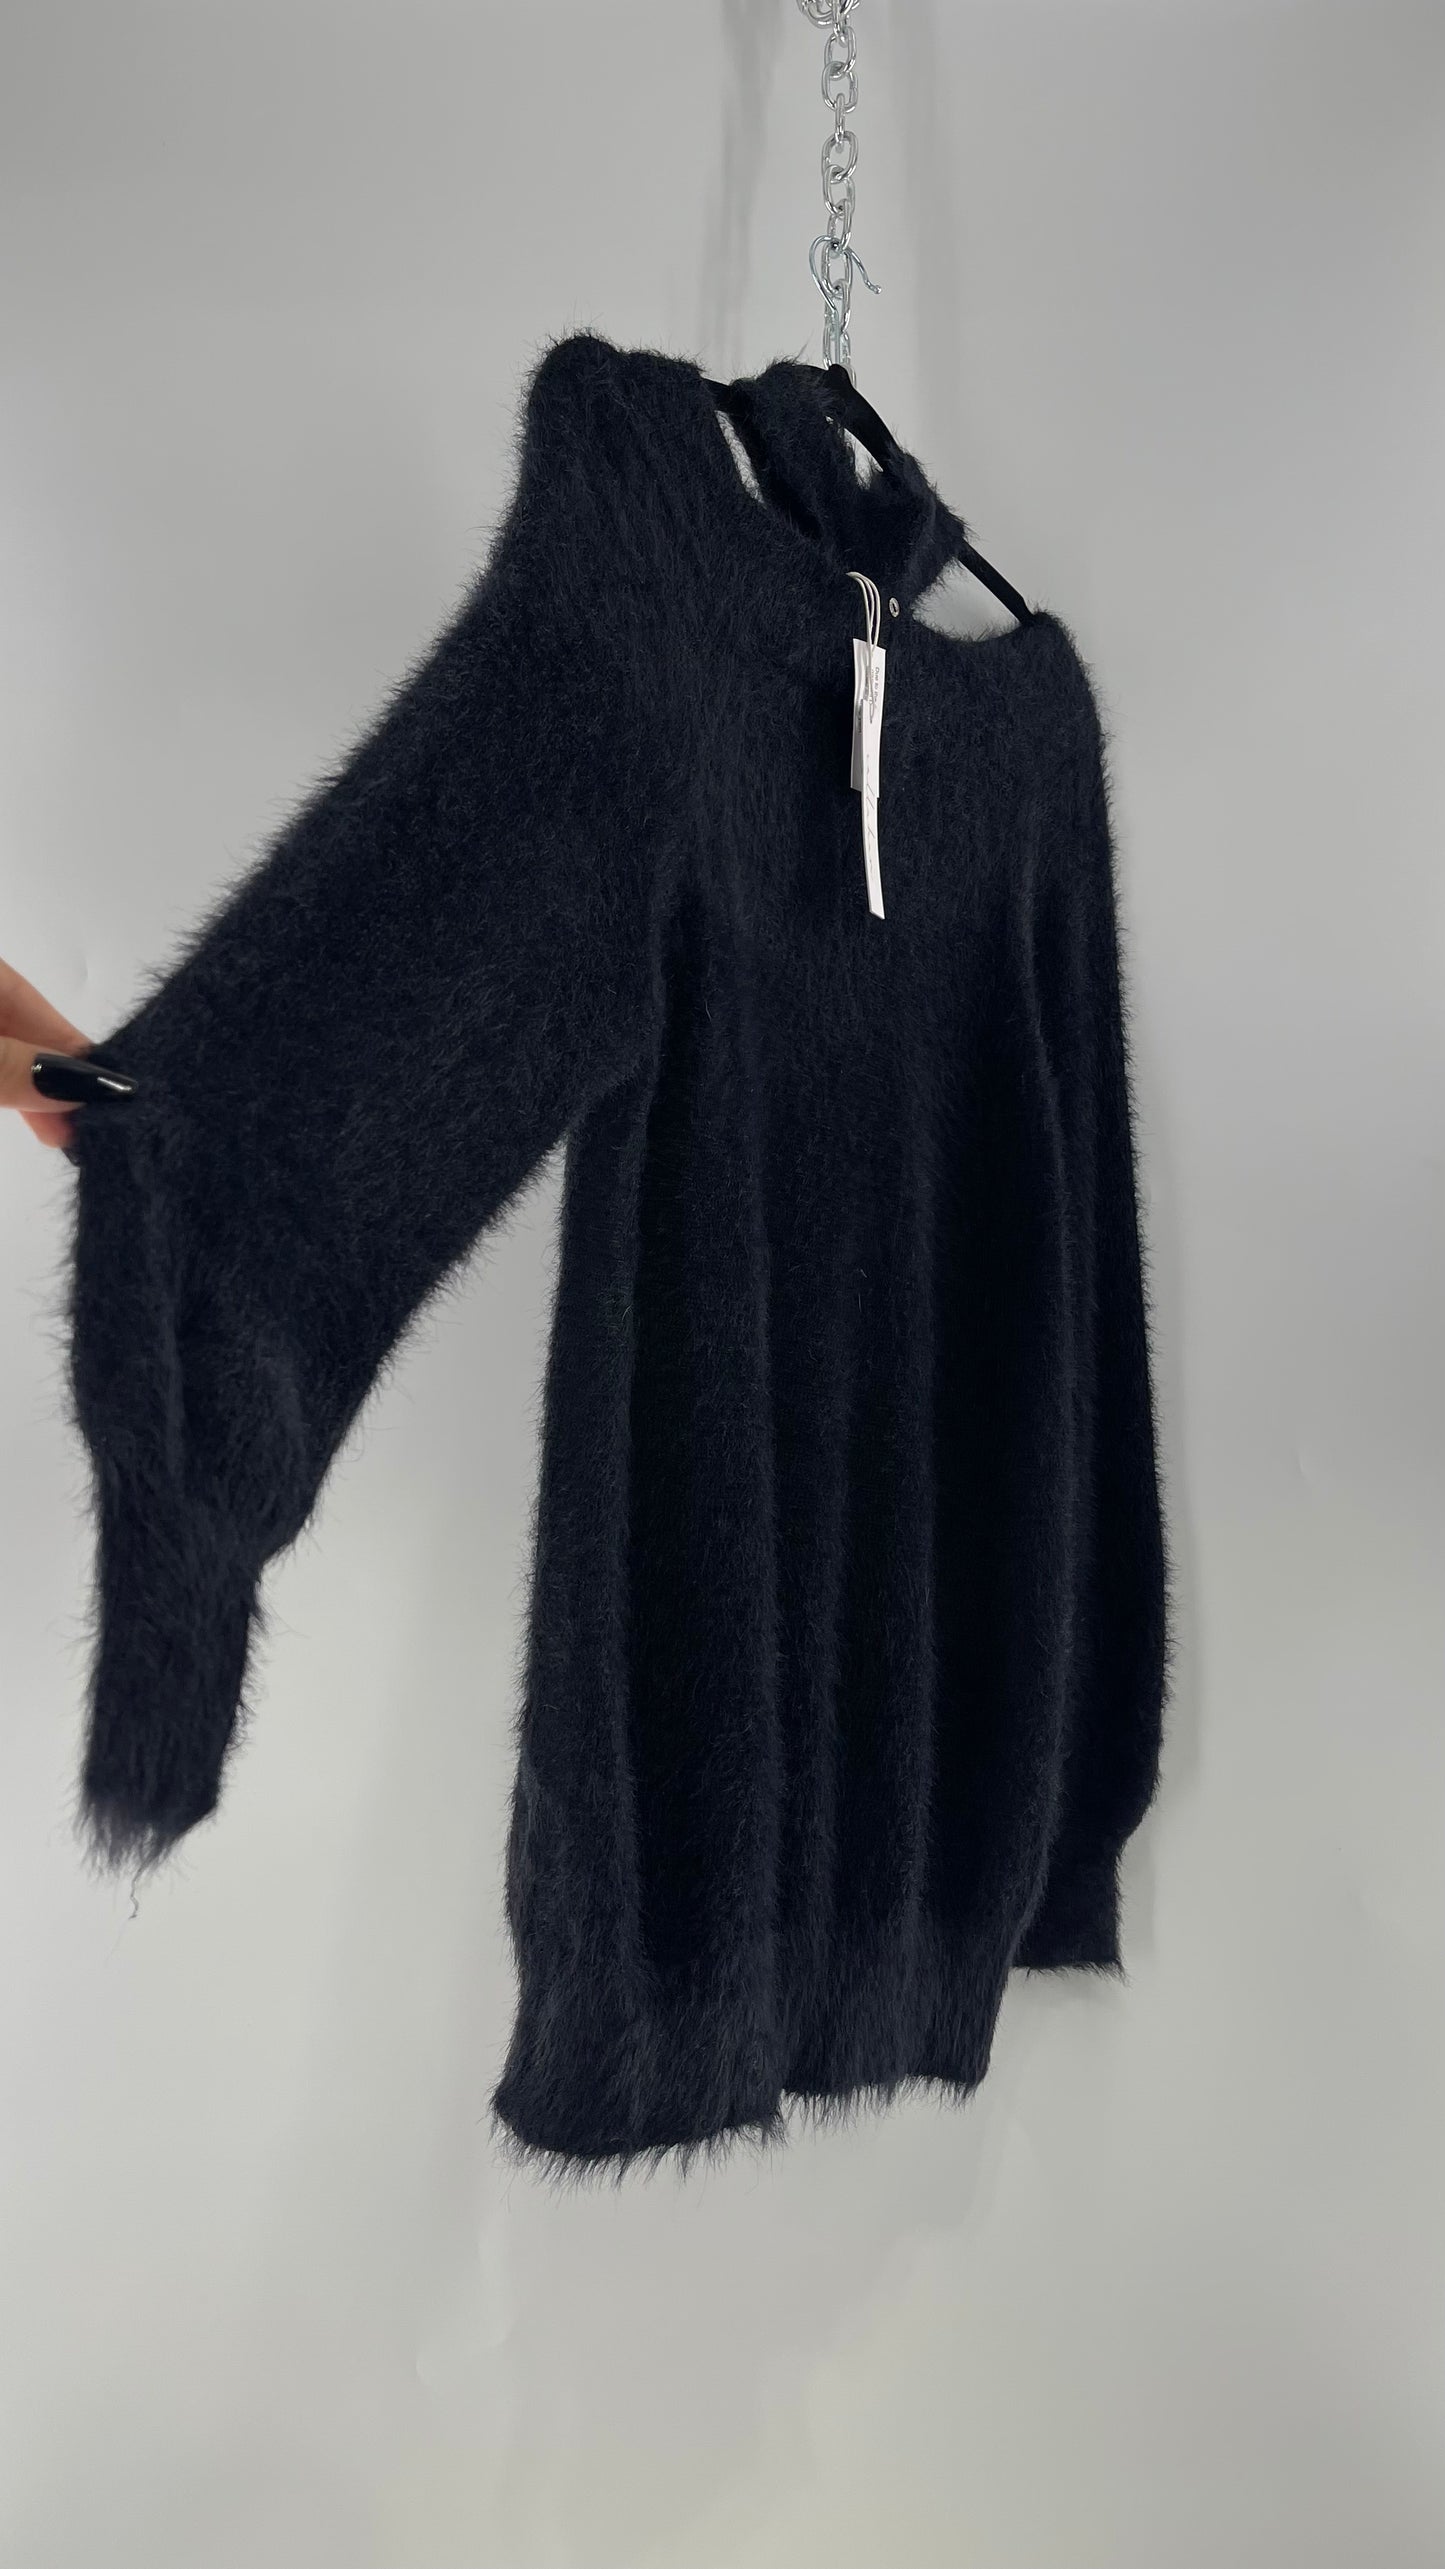 Callahan Black Fuzzy/Shaggy Slouchy Sweater with Choker Neckline Detail (Small)